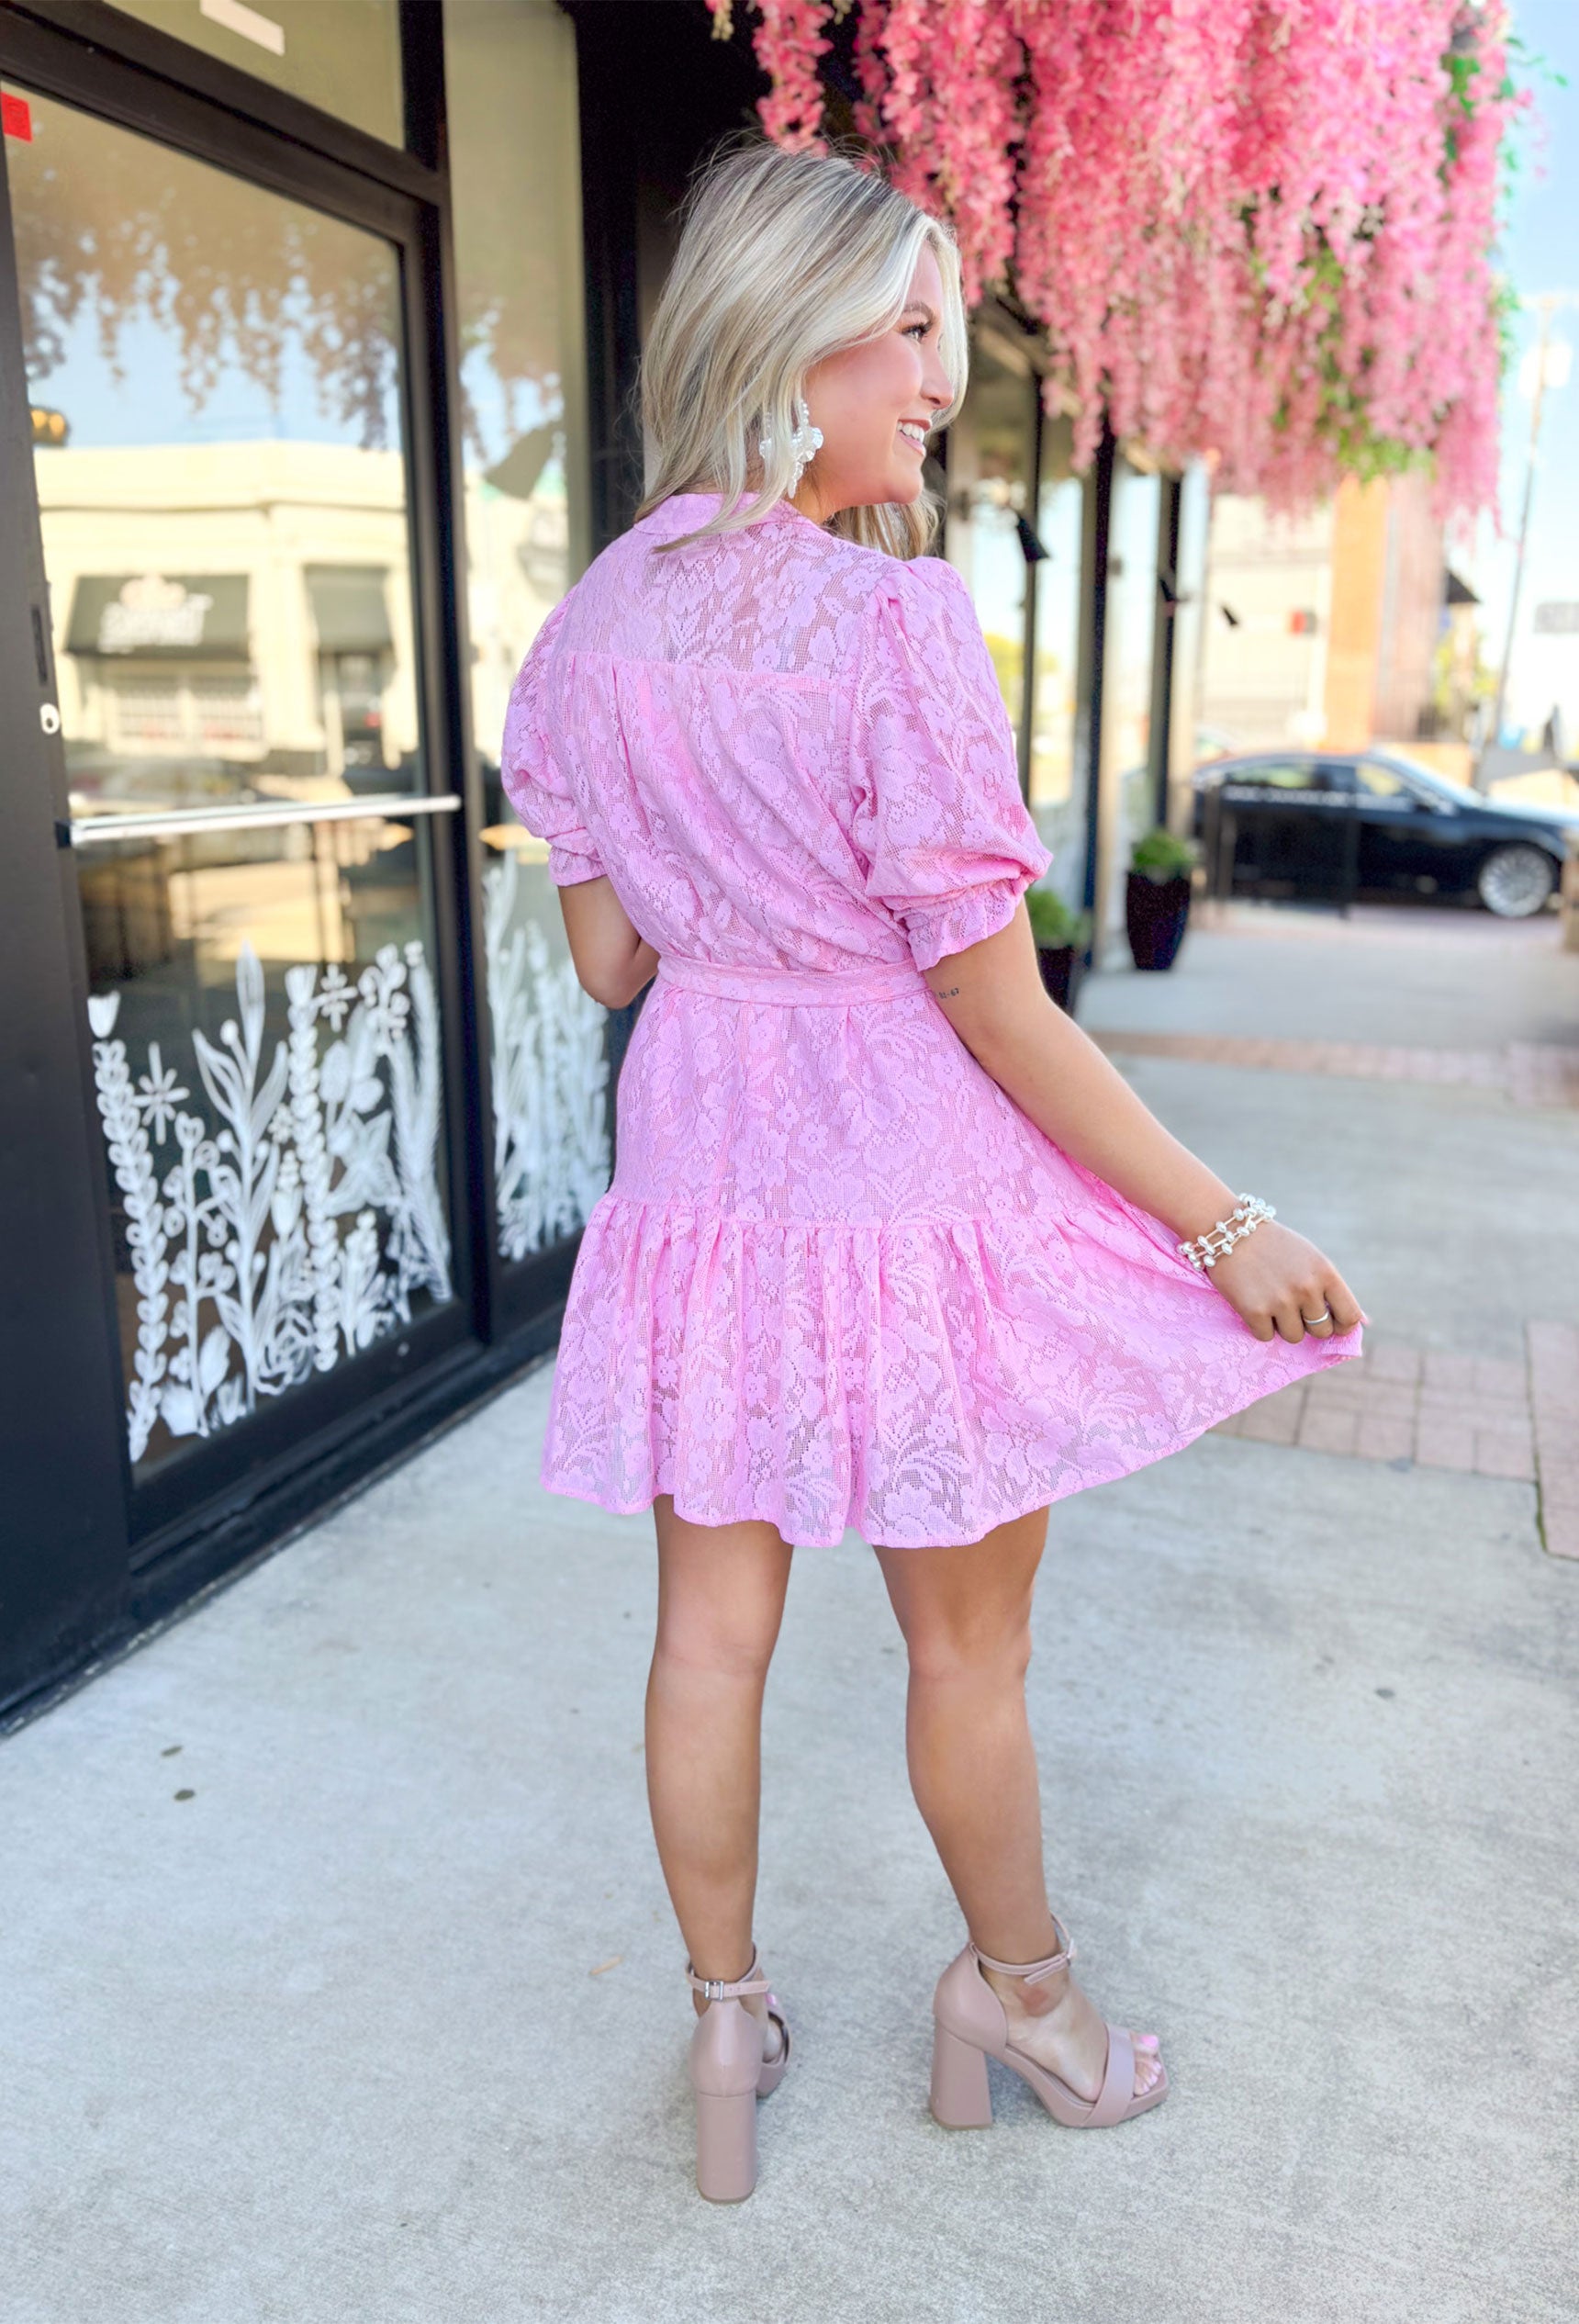 Making Me Blush Dress, bubblegum pink lace puff sleeve dress with quarter button down detail and tie detail around the waist